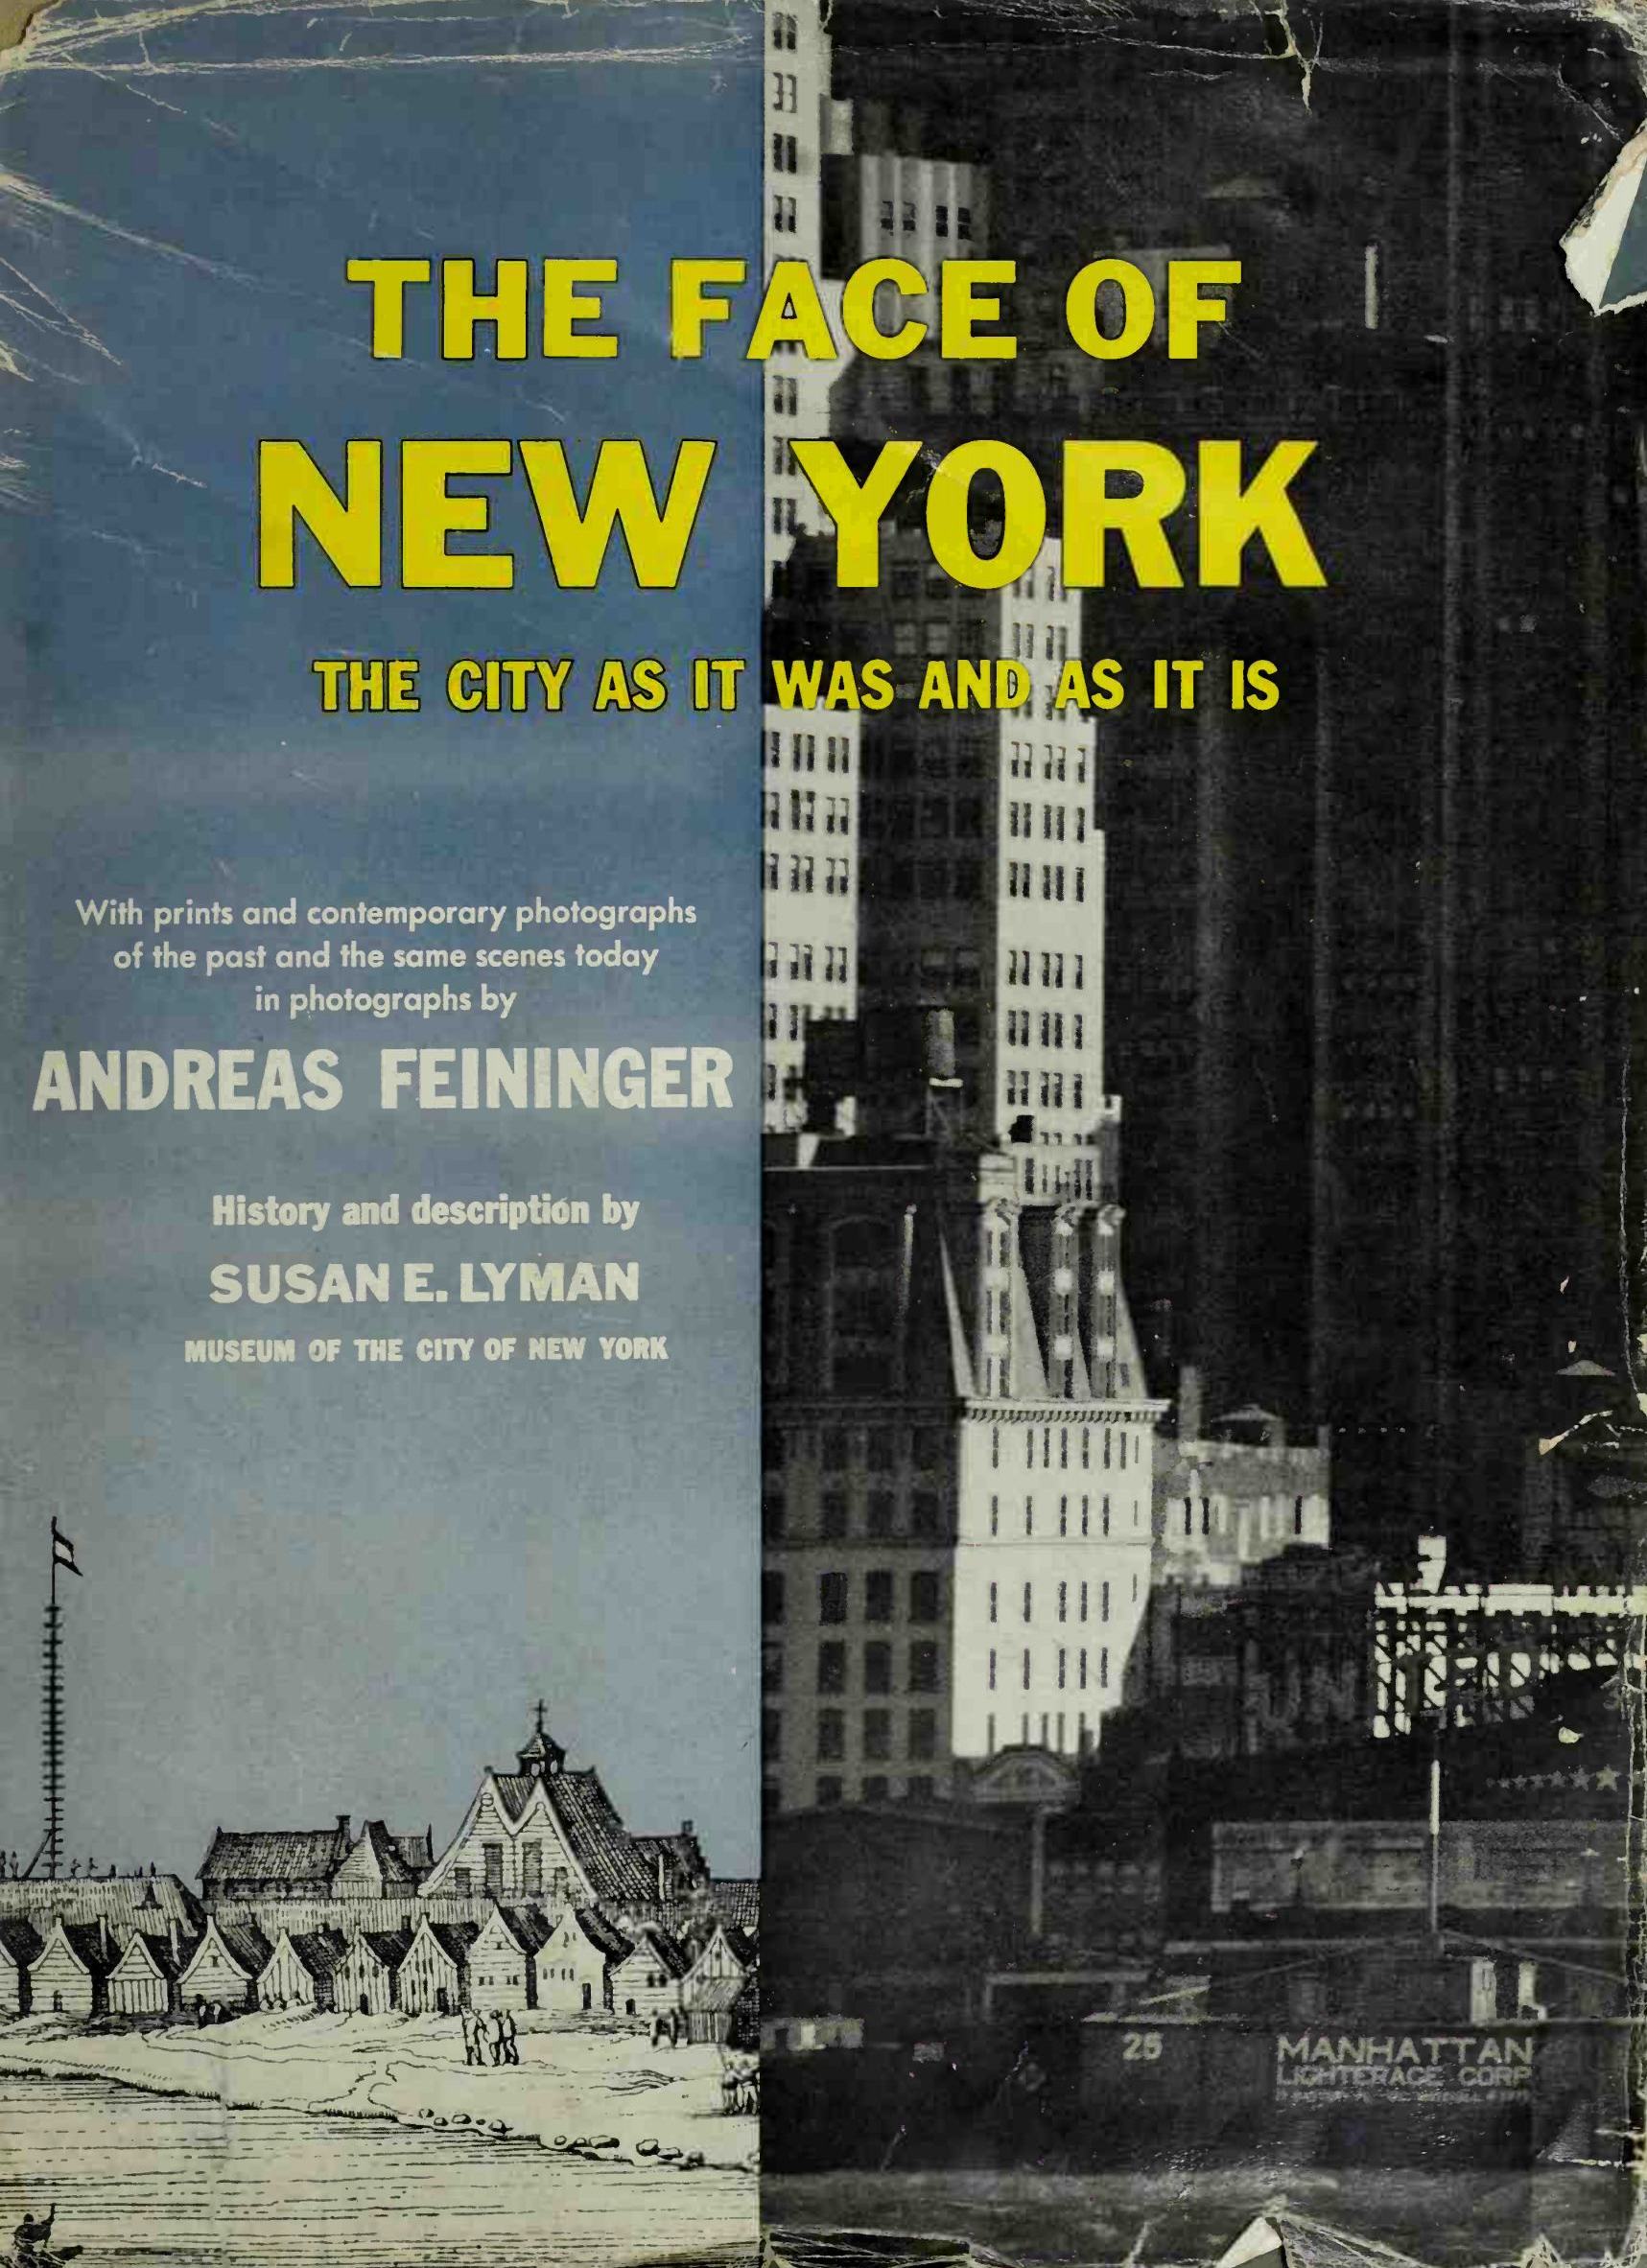 The face of New York : The city as it was and as it is : With prints and contemporary photographs of the past and the same scenes today in photographs by Andreas Feininger : History and description by Susan E. Lyman, Museum of the city of New York. — New York : Crown Publishers, Inc., 1954